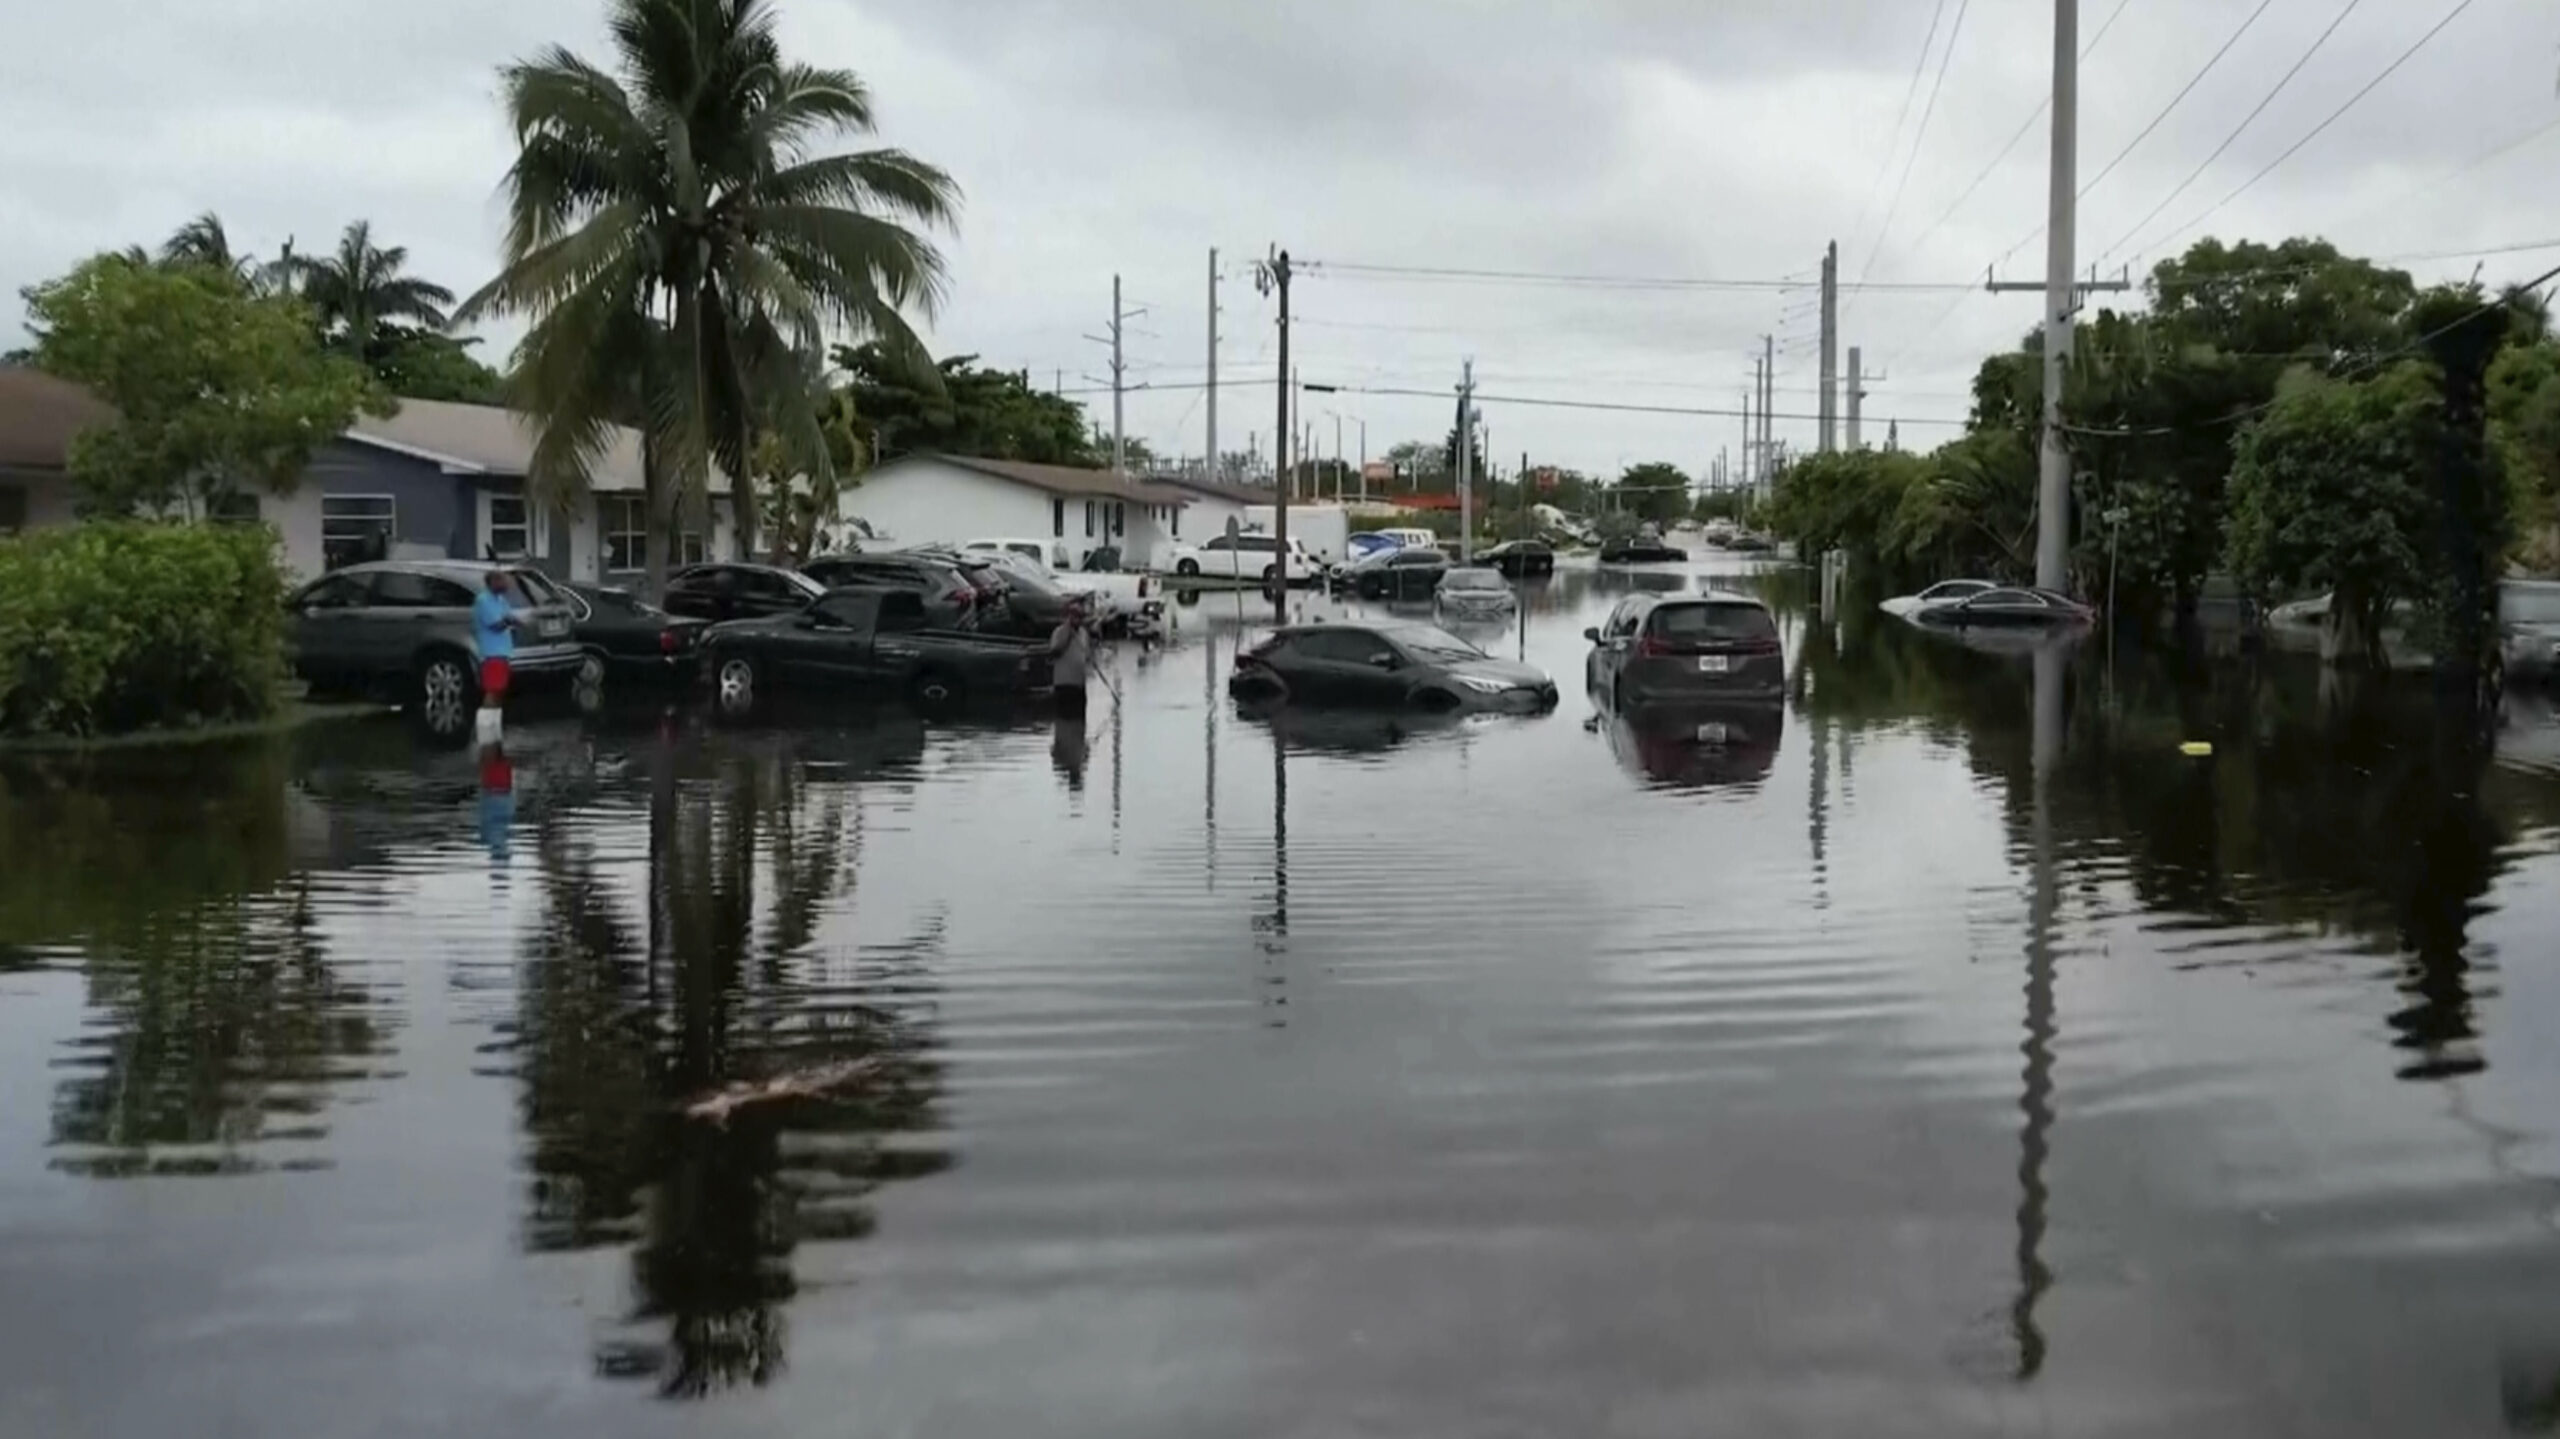 Floods rushed into vehicles, causing them to stall